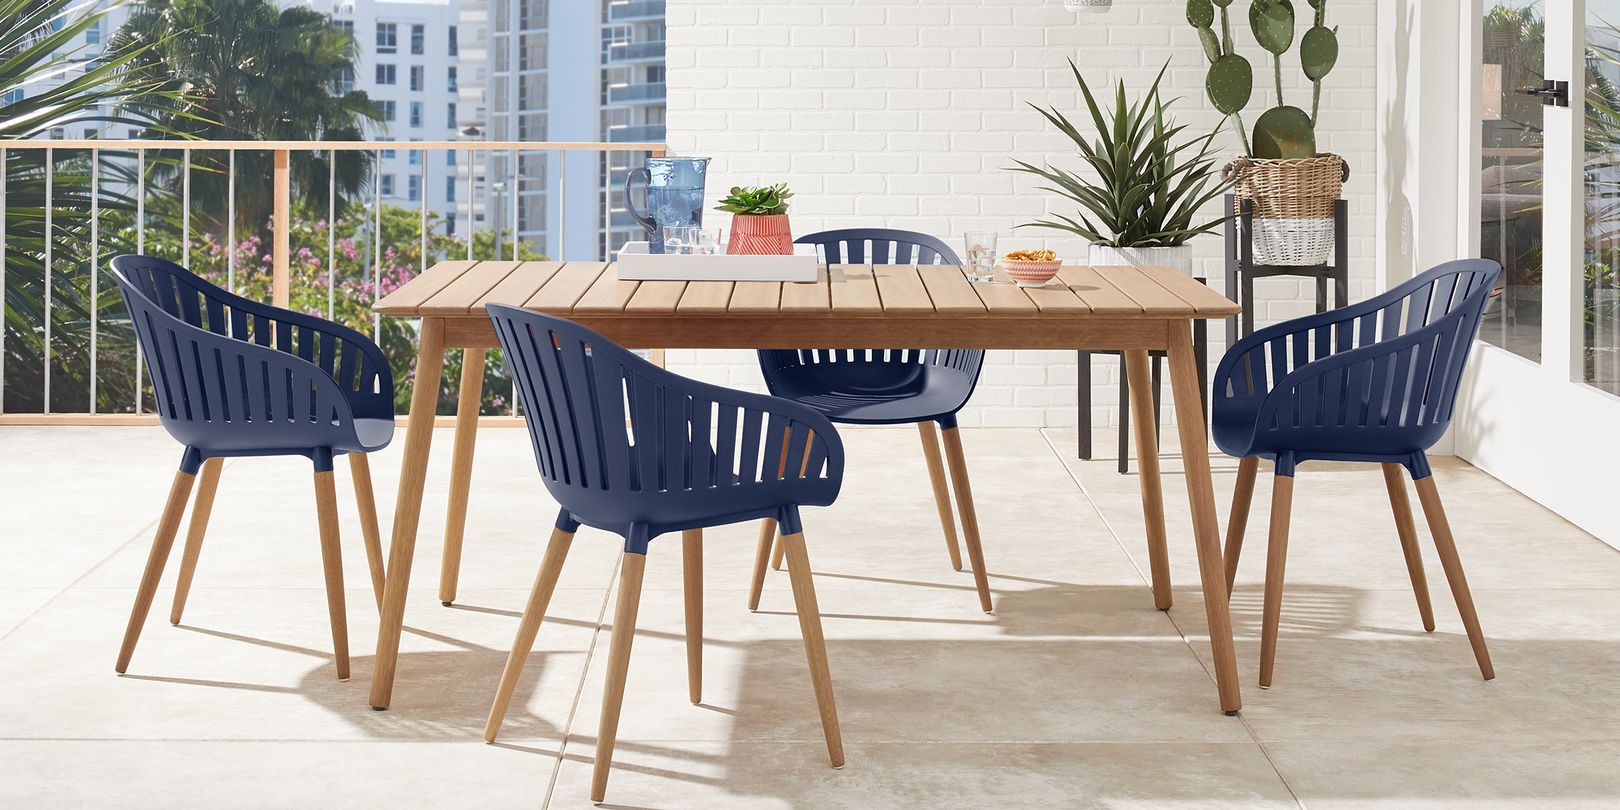 Photo of a teak mid-century patio table with four blue chairs